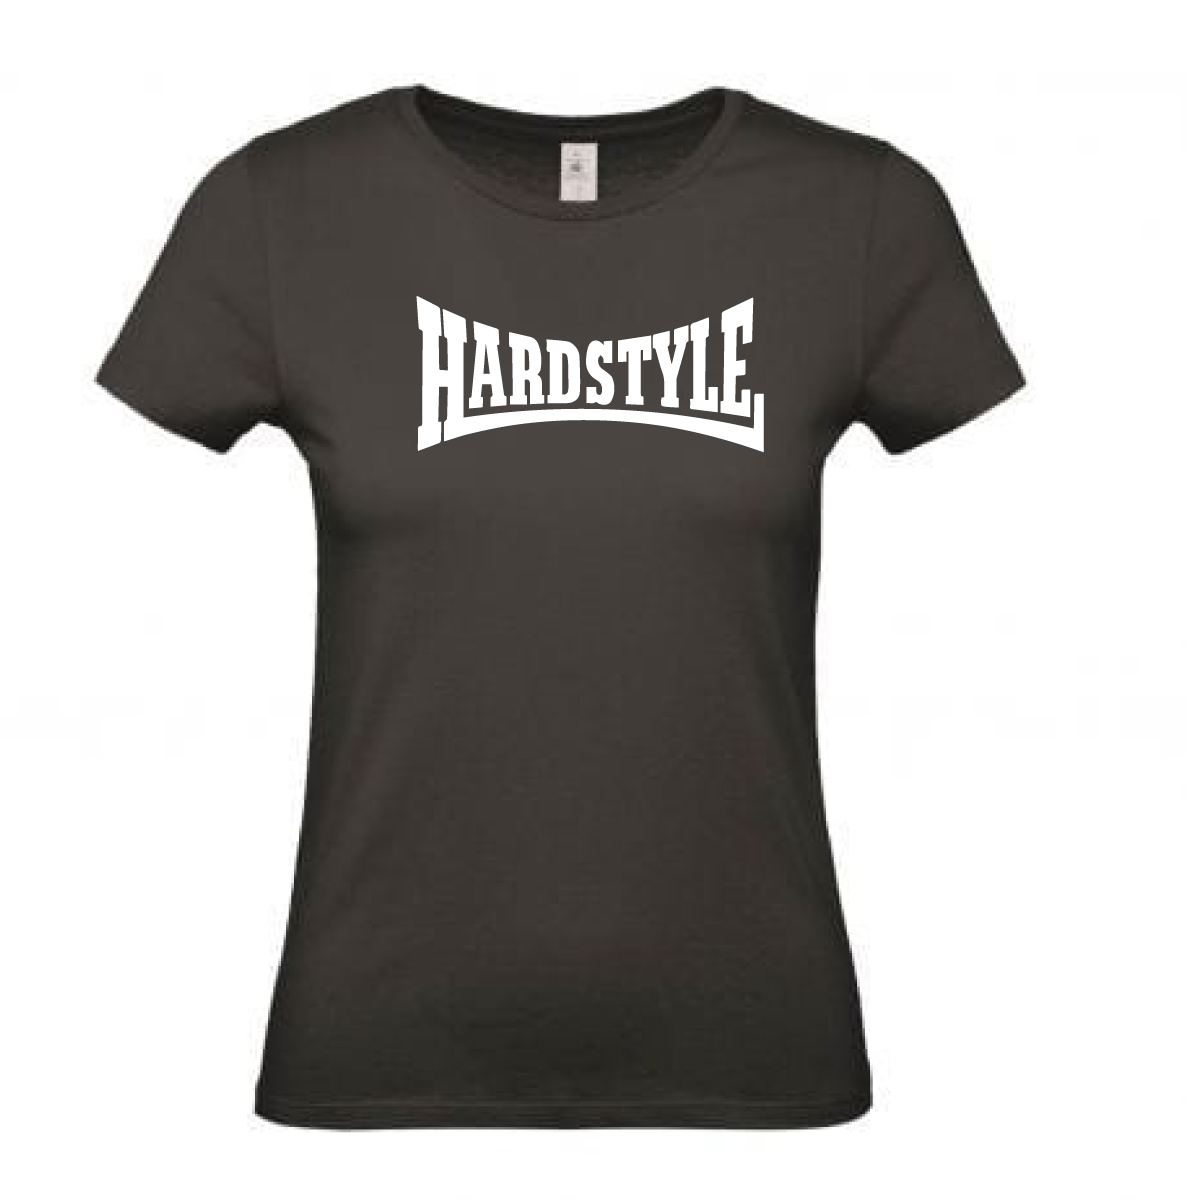 hardstyle classic shirt black for her